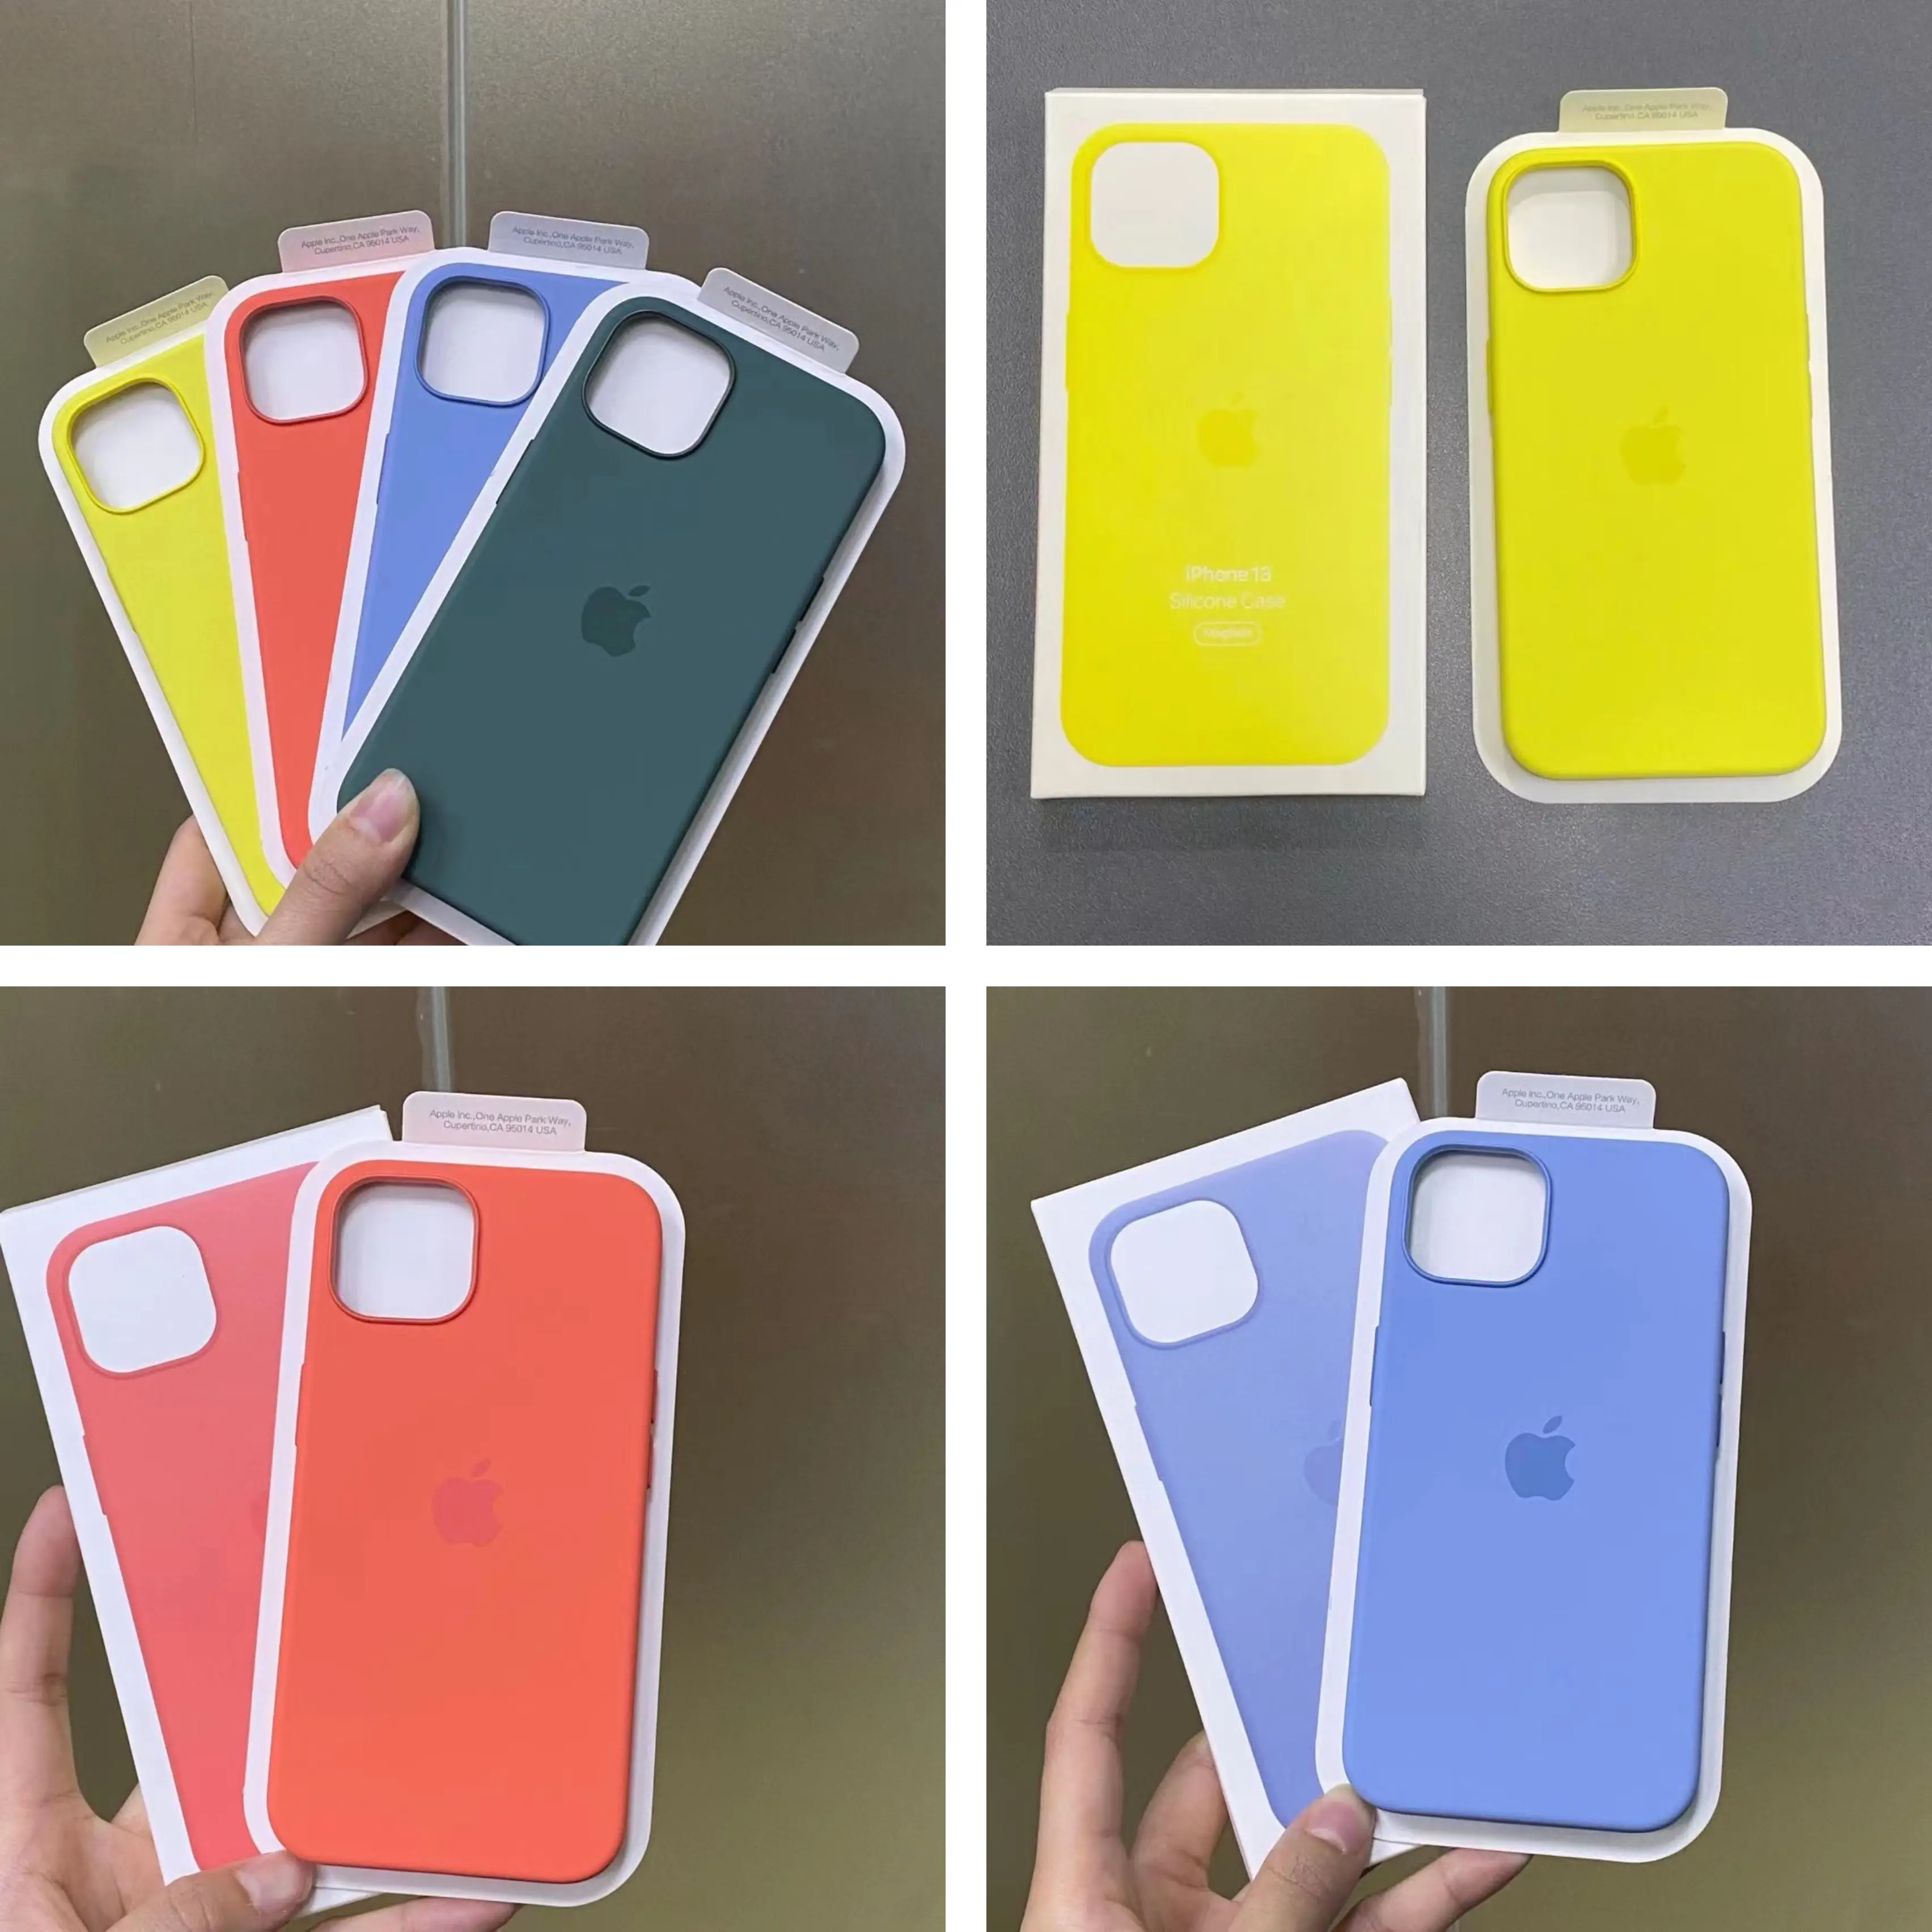 Four images shared in a grid that depict the alleged new spring-themed colors for Apple's MagSafe cases for the iPhone 13 family